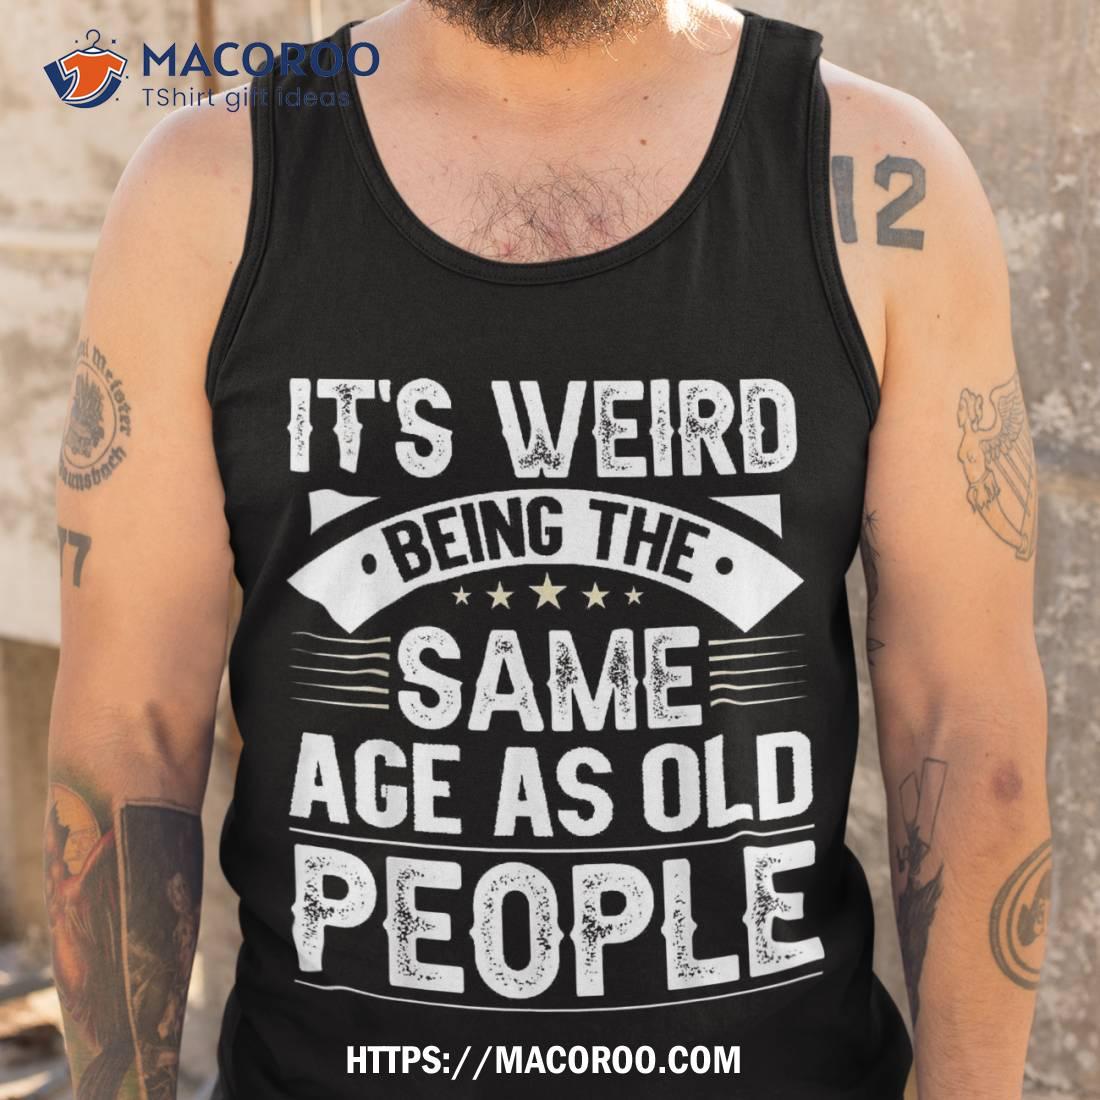 https://images.macoroo.com/wp-content/uploads/2023/08/it-s-weird-being-the-same-age-as-old-people-retro-shirt-cool-fathers-day-gifts-tank-top.jpg